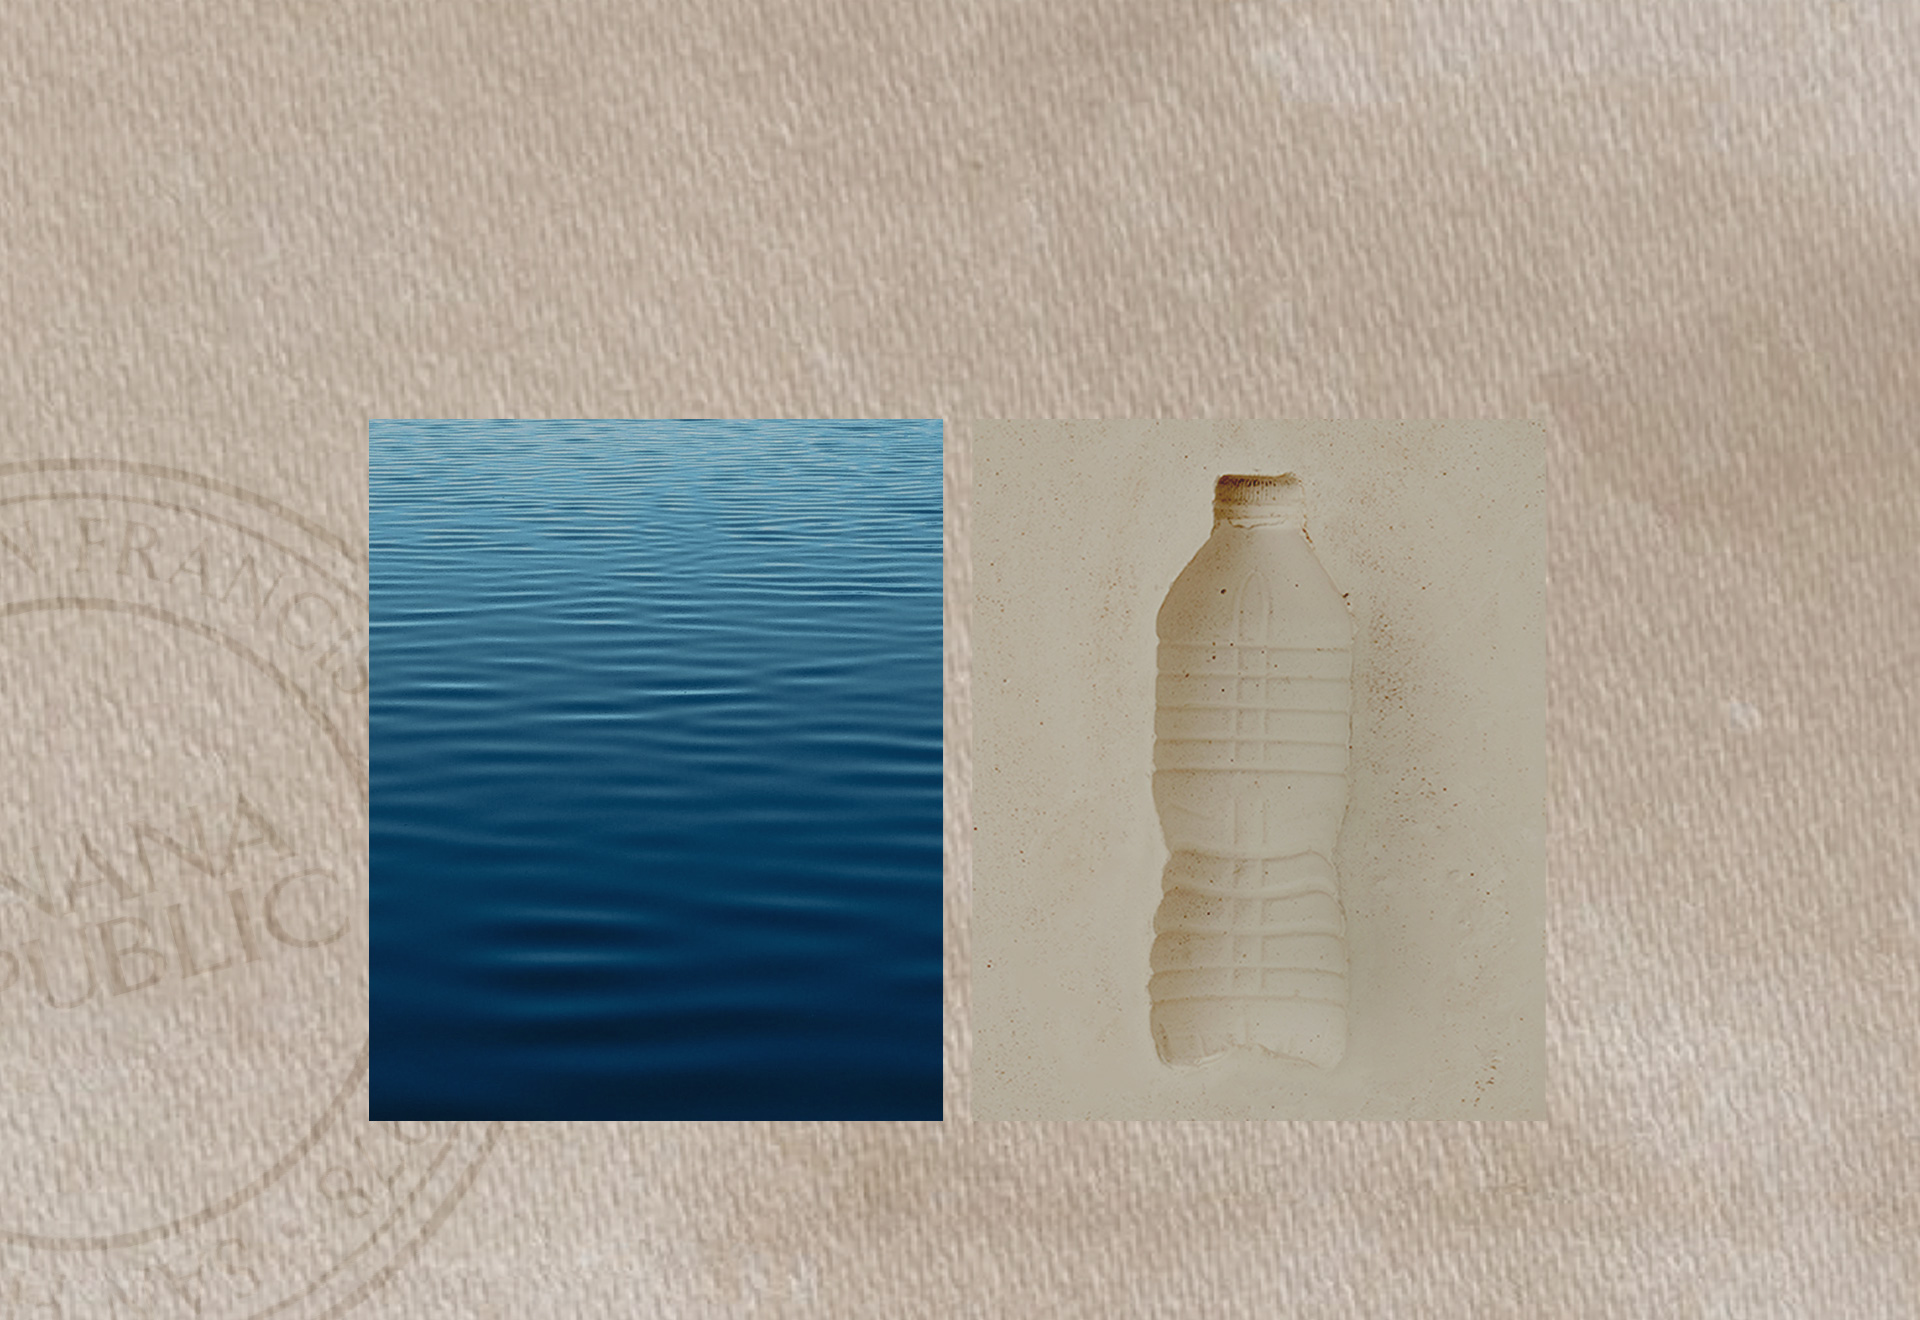 The Numbers. A quatitative look at how much we're saving.  Since 2020 Liters of WATER SAVED: 42M. Thanks to innovative dye techniques and wash methods.  To date PLASTIC BOTTLES DIVERTED - 85.9M. By upcycling post-consumer bottles into garments.